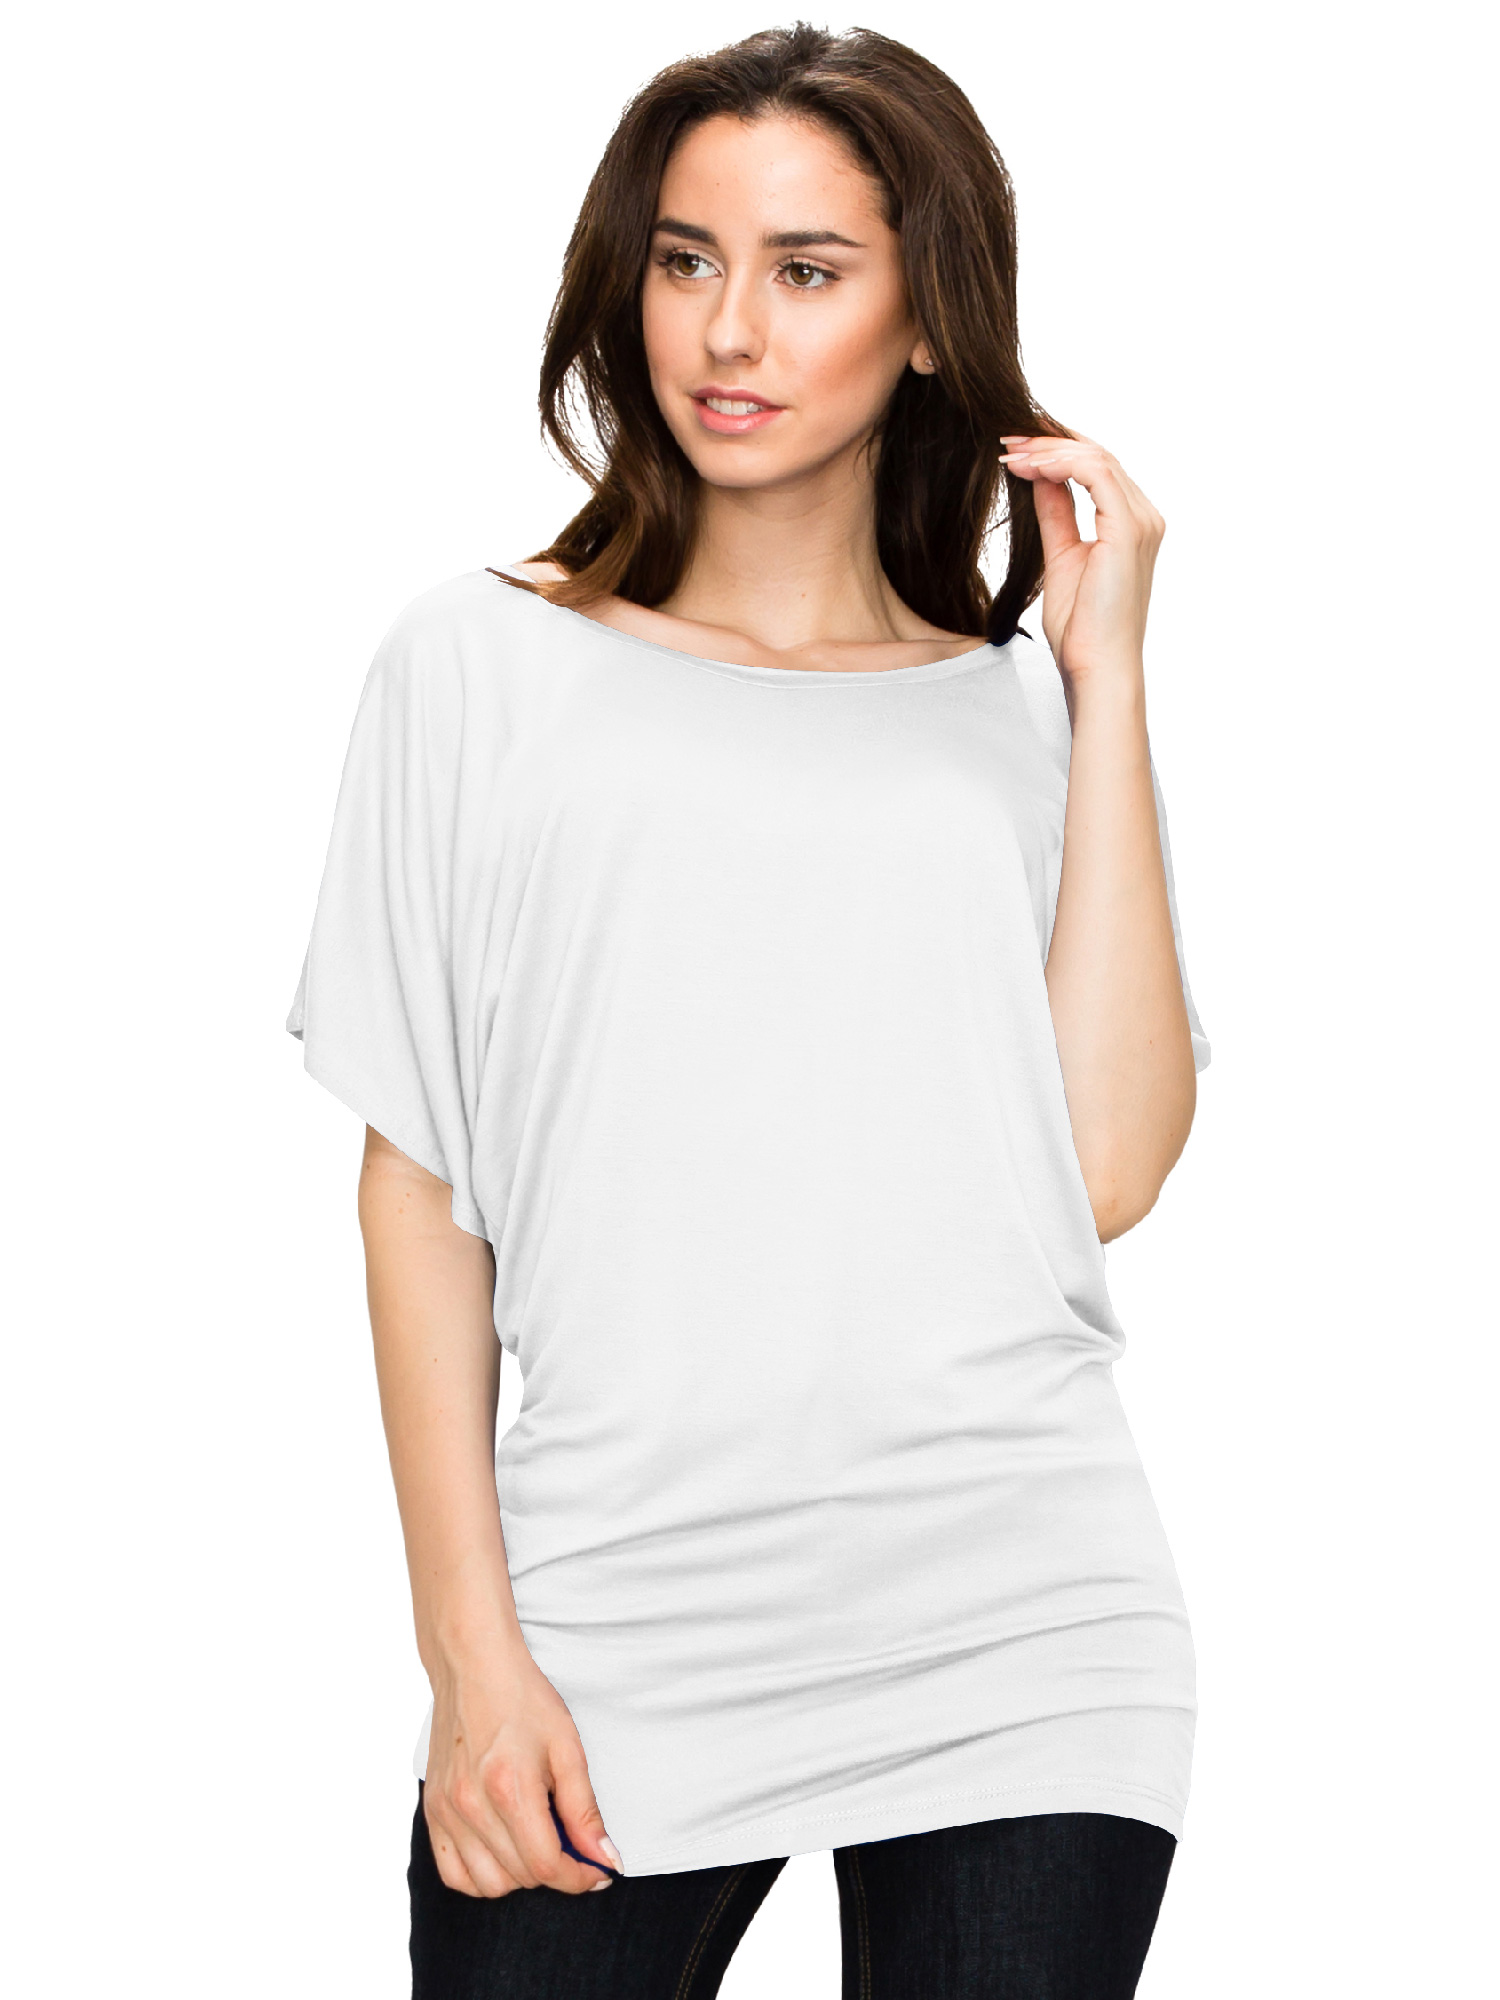 Made by Johnny Women's Boat Neck Short Sleeve Dolman Drape Top S WHITE - image 3 of 6